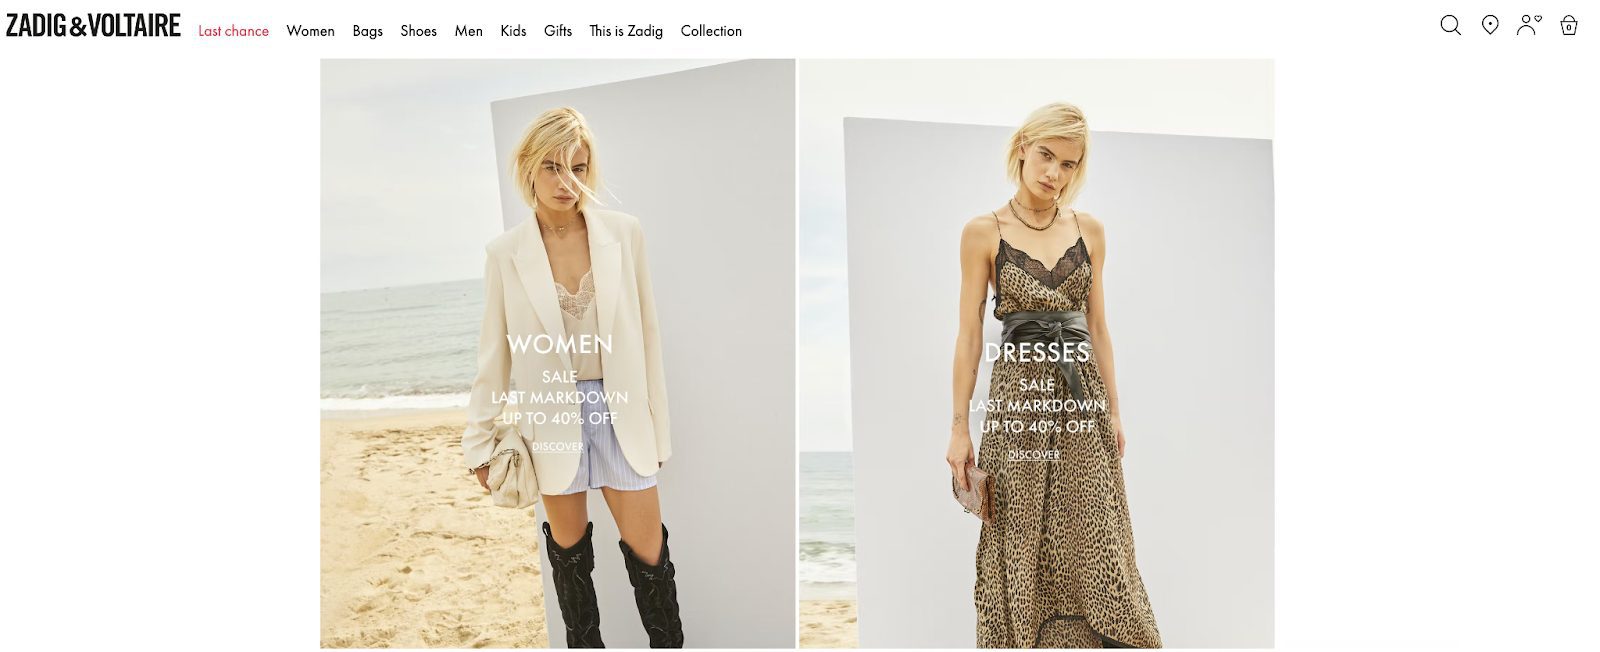 Headless Store Examples (Zadig & Voltaire's )